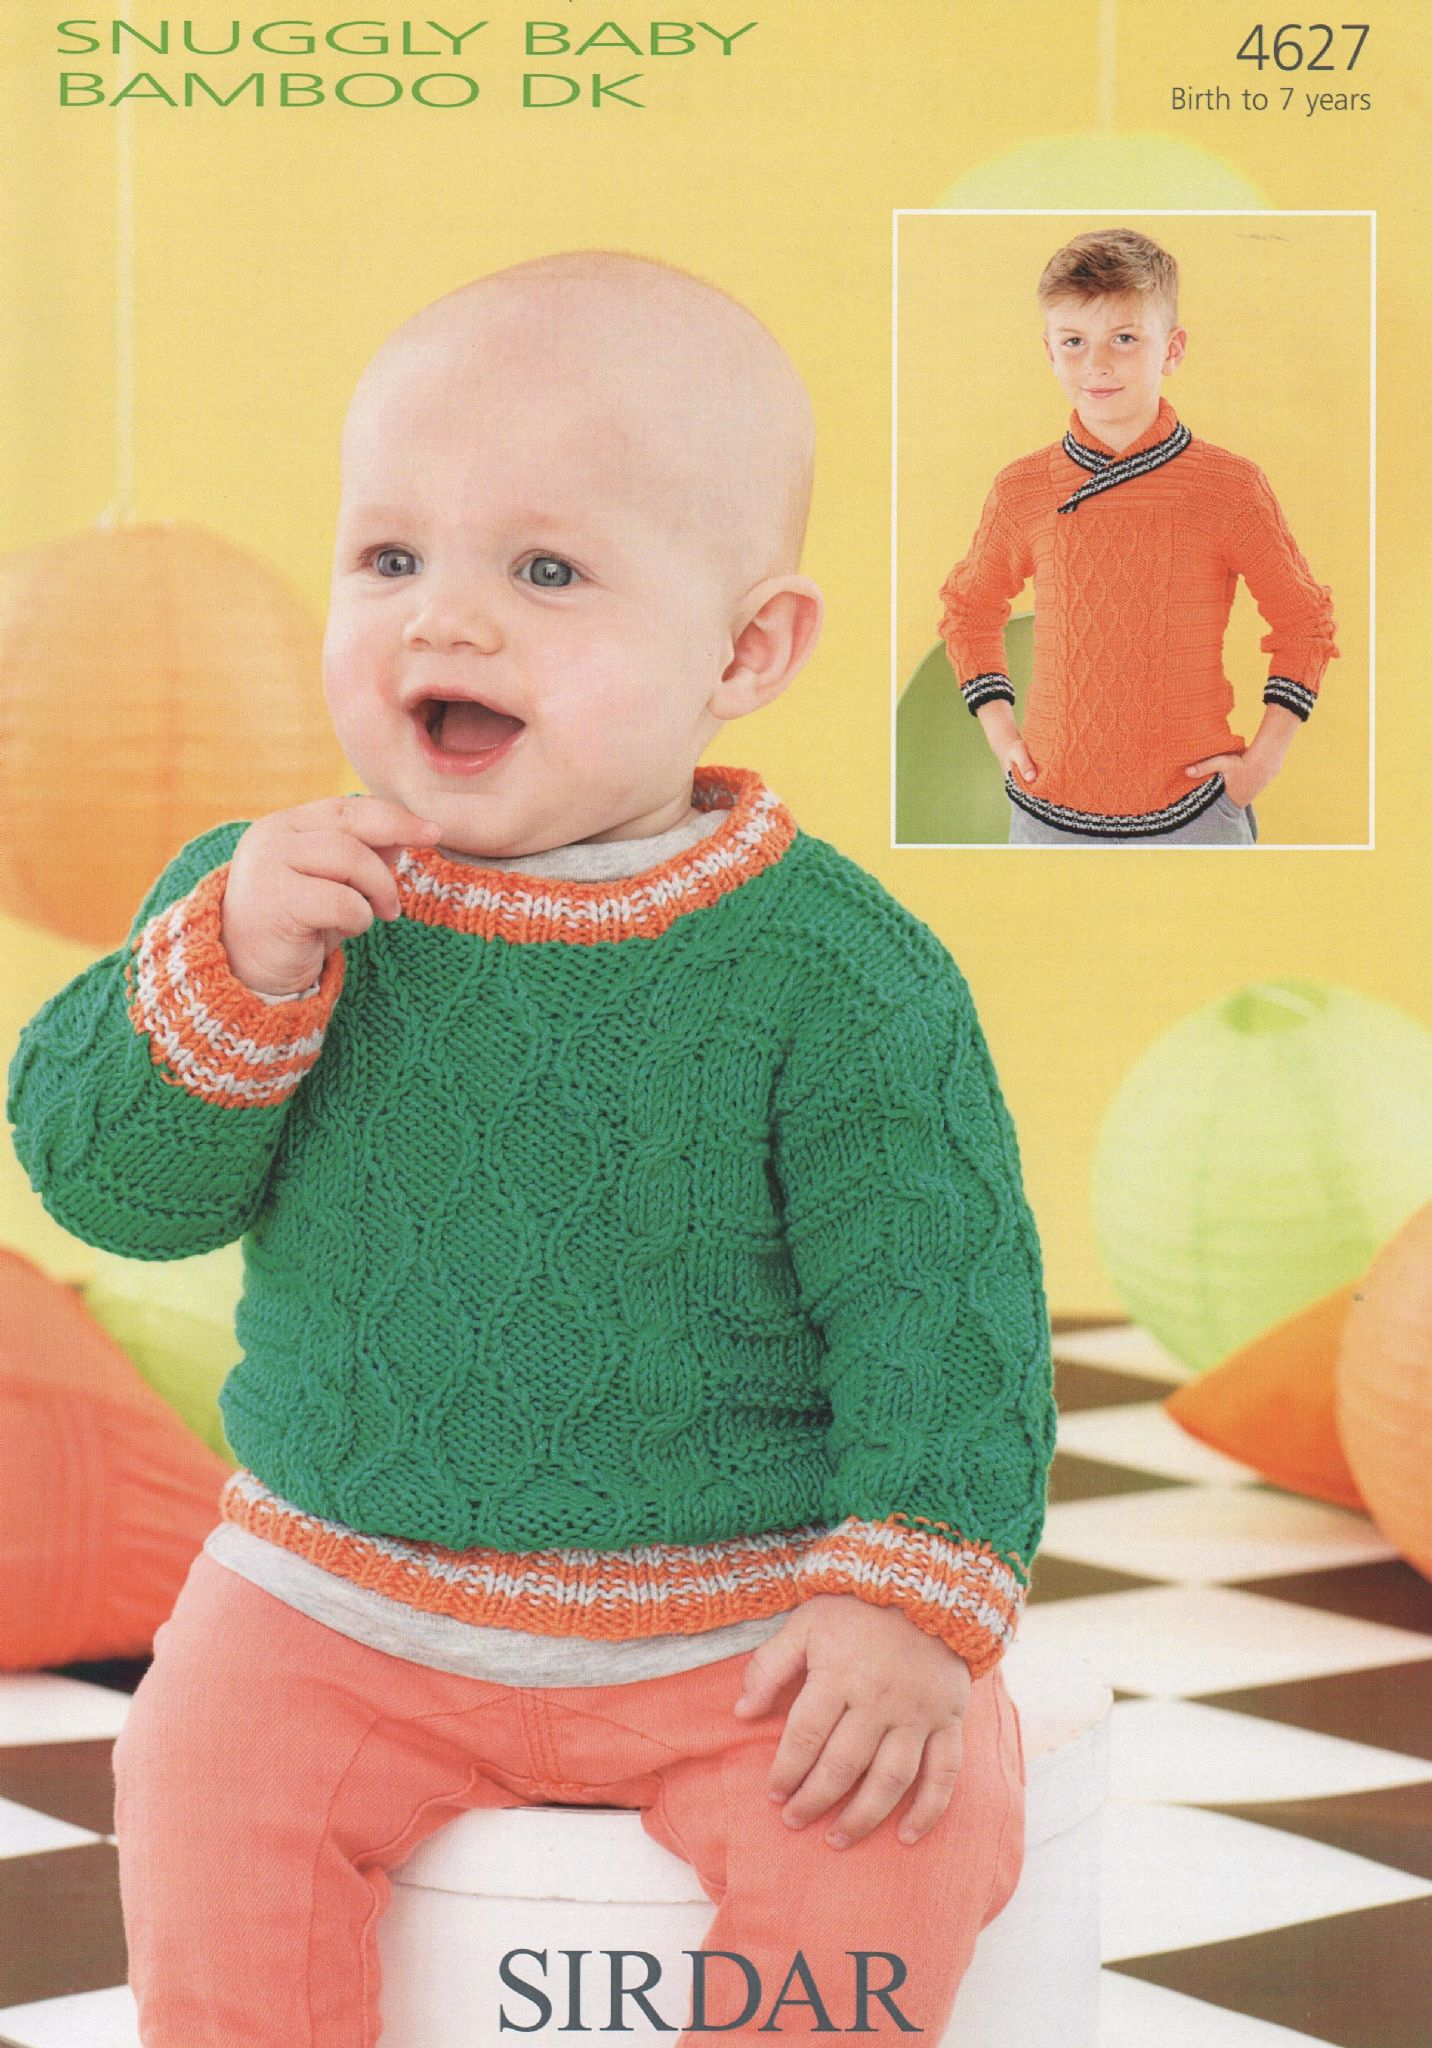 Sirdar Baby Knitting Patterns 4627 Sirdar Snuggly Ba Bamboo Dk Sweater Knitting Pattern To Fit Birth To 7 Years